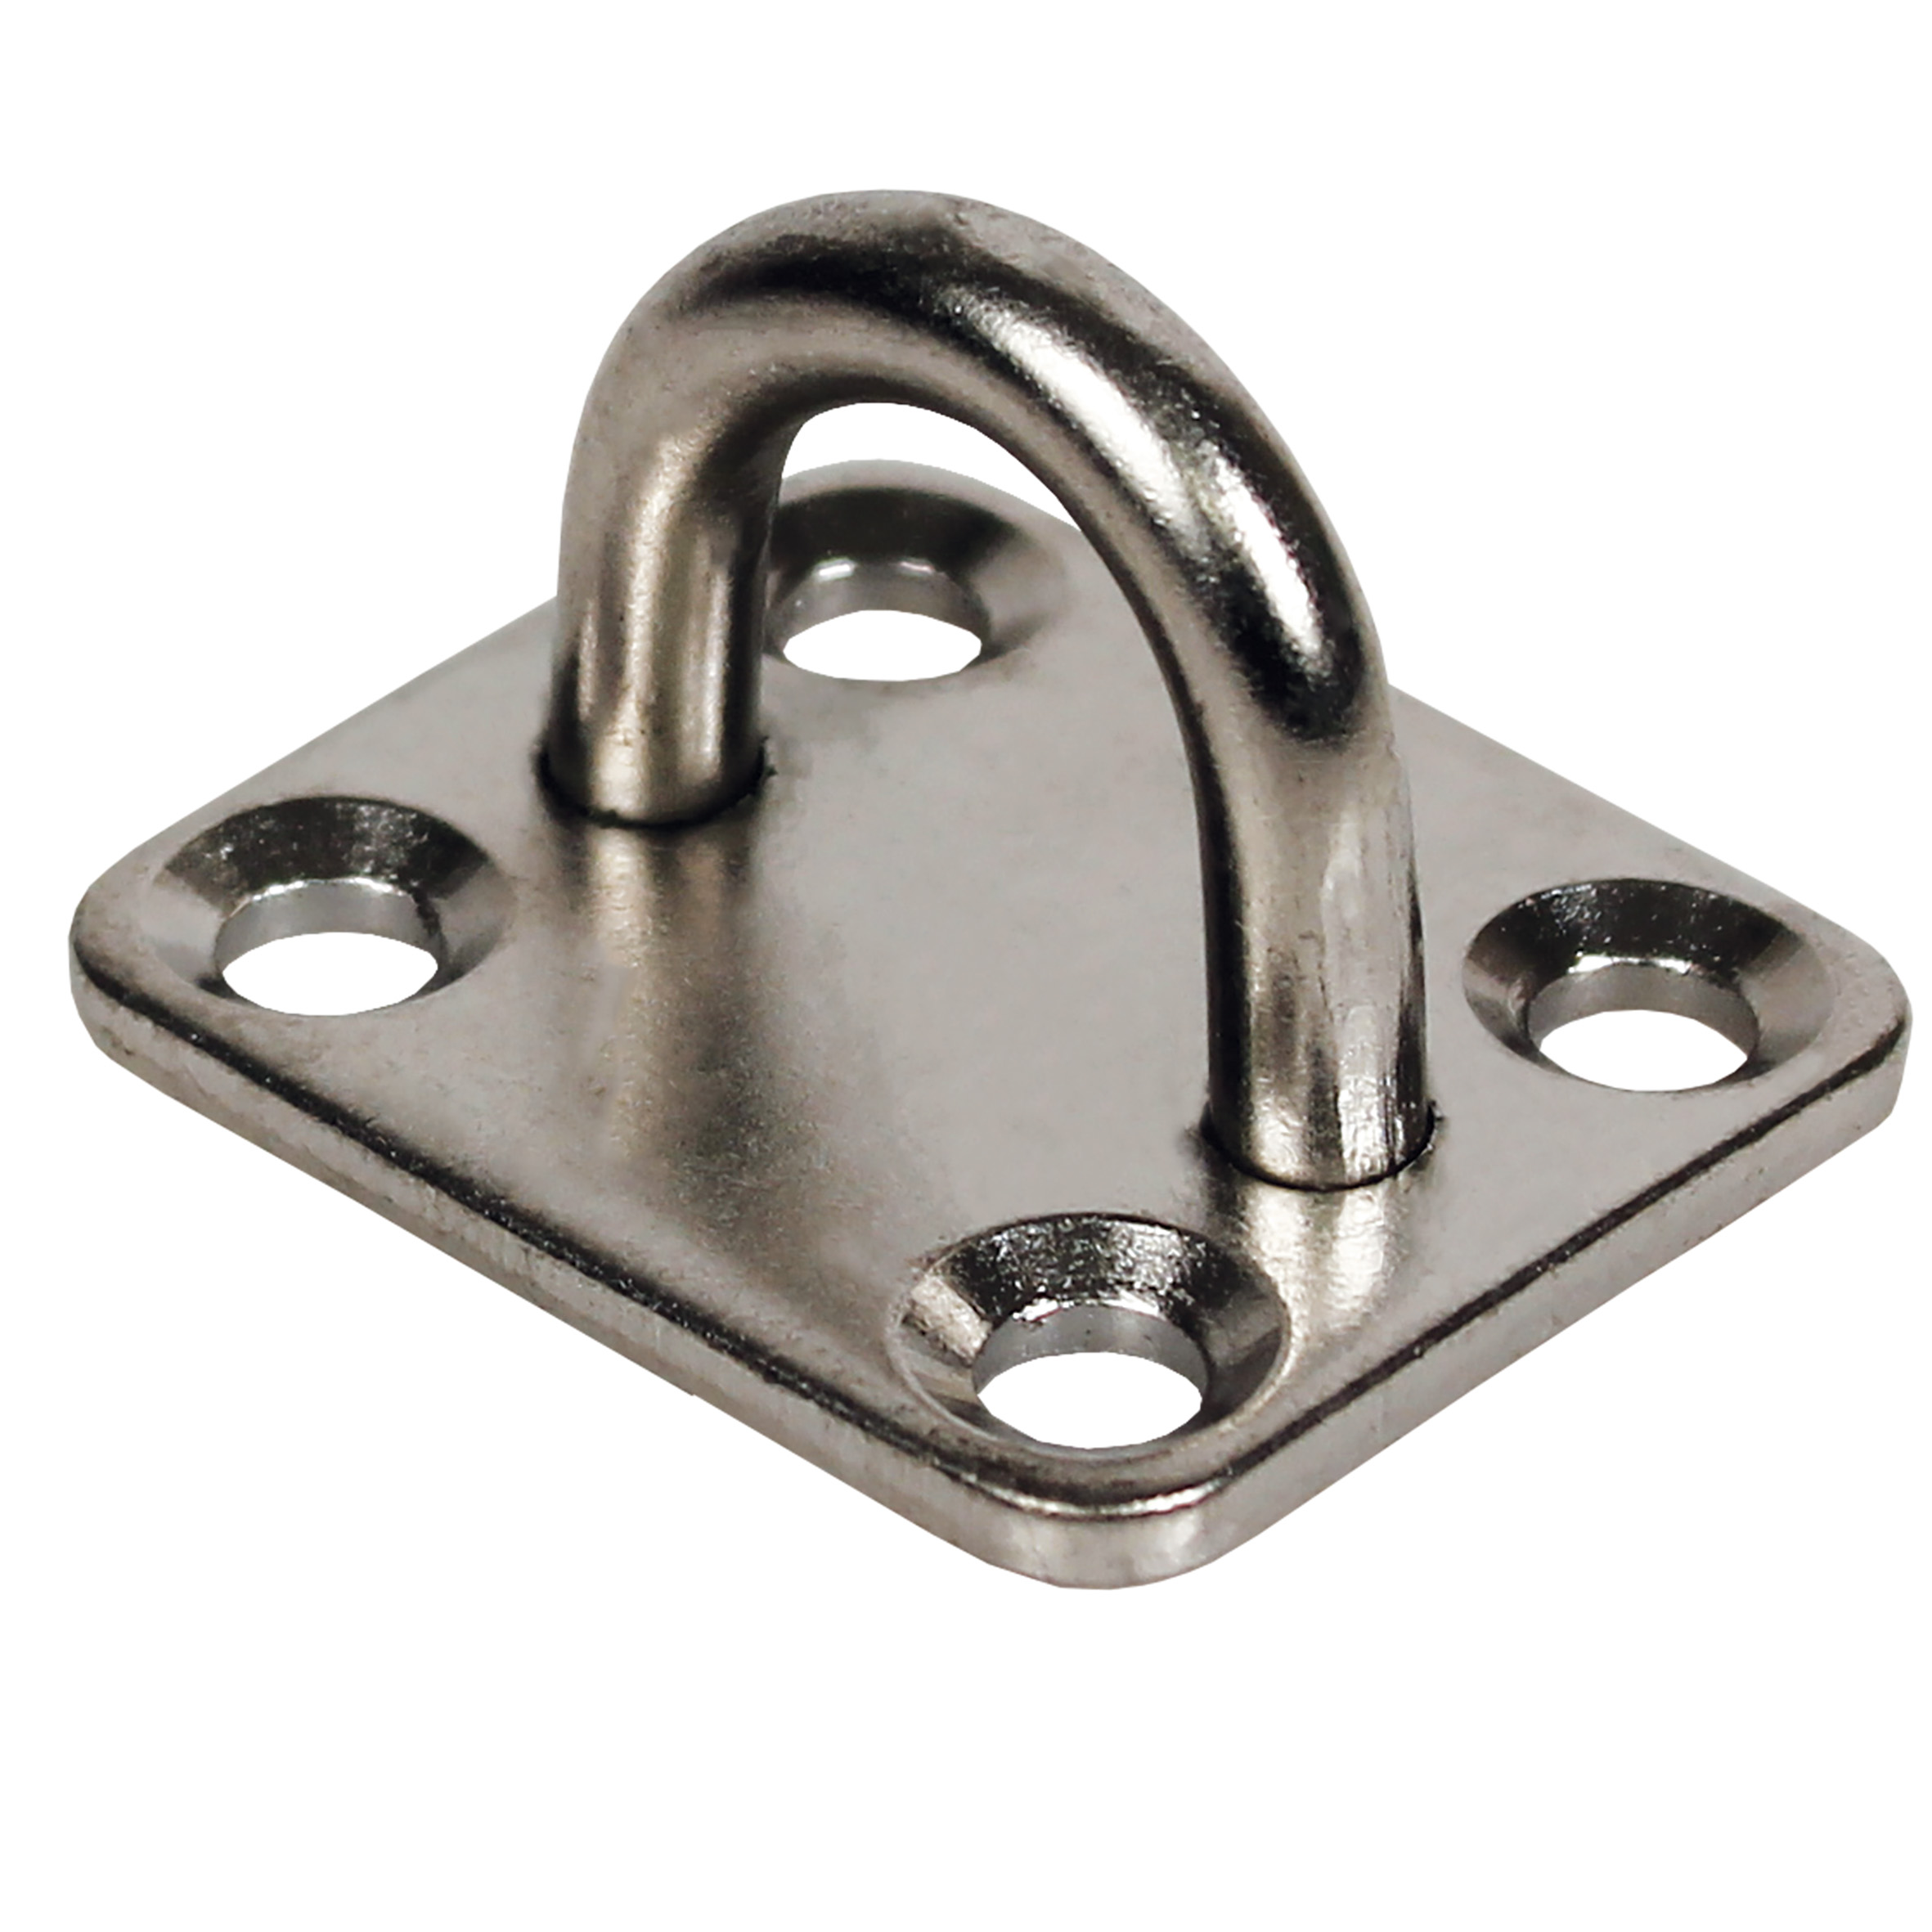 Pad eye on mounting plate - Stainless steel - Square - 